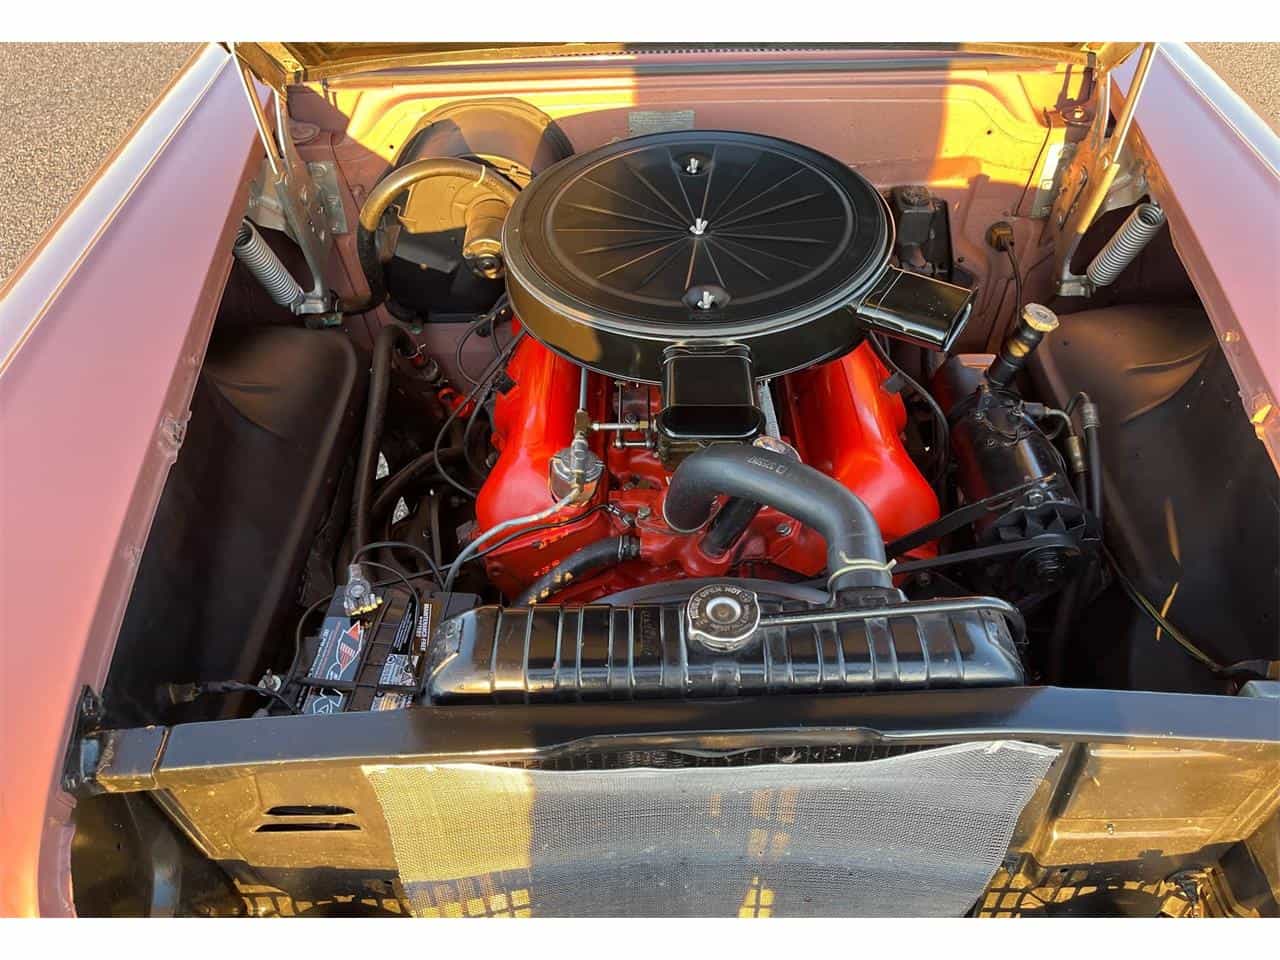 , Pick of the Day: 1958 Chevrolet Impala finished in rare coral color, ClassicCars.com Journal